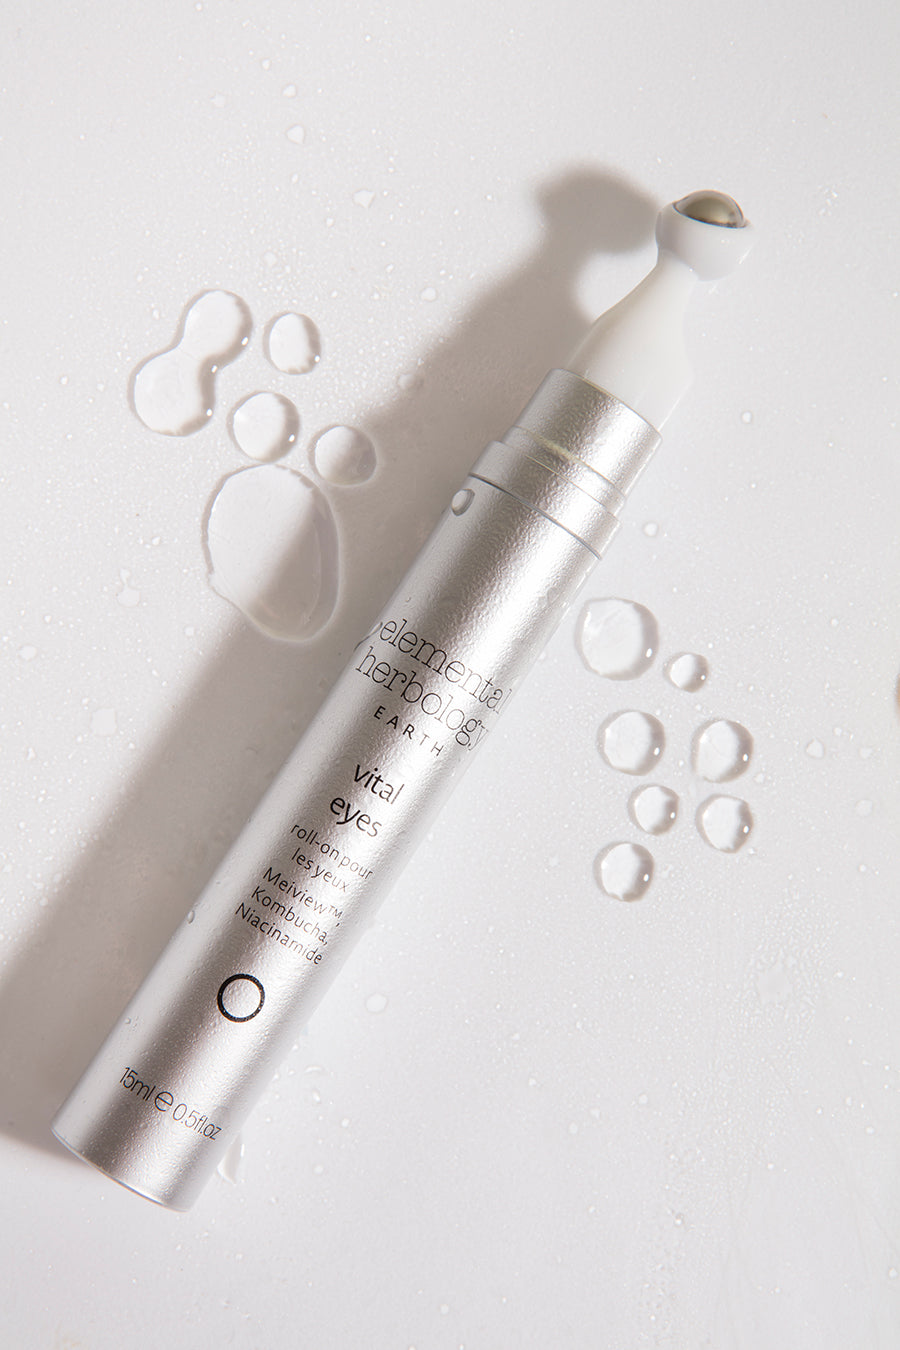 Energizing eye roller serum will help revive tired eyes, stimulating lightening of darkness and reducing puffiness